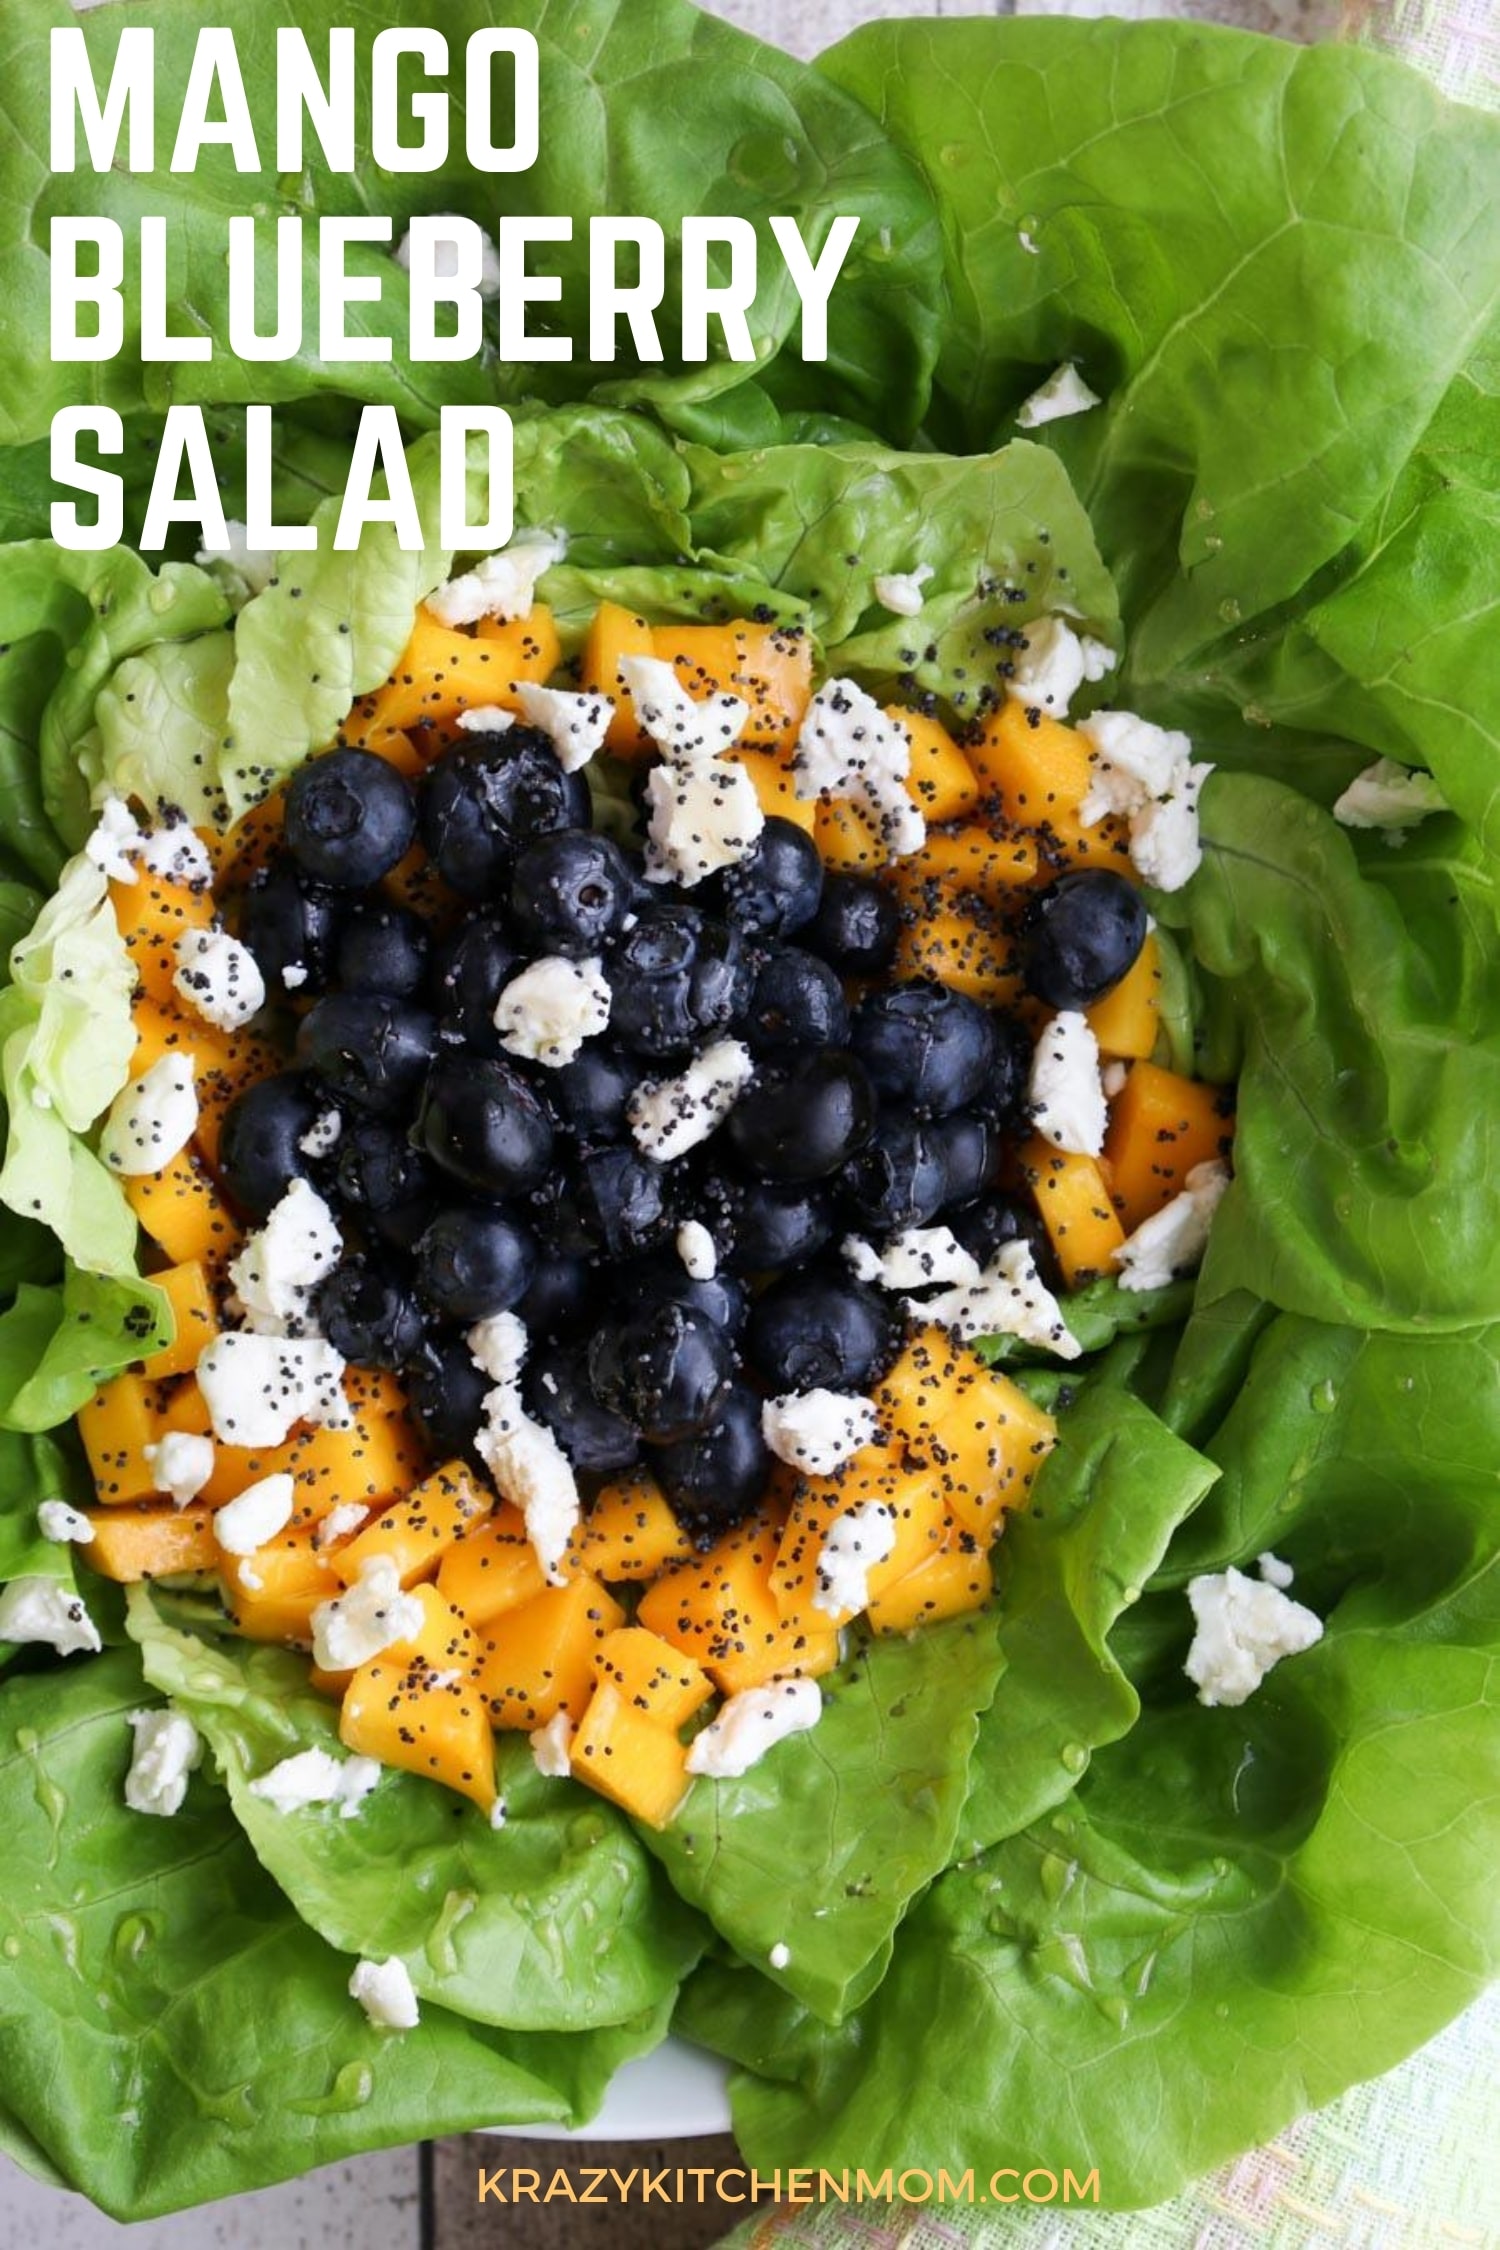 This salad is as beautiful to look at as it is to eat.  The freshness jumps off the plate with the bright juicy fruits and the tart goat cheese drizzled lightly with vinegar and olive oil.  via @krazykitchenmom